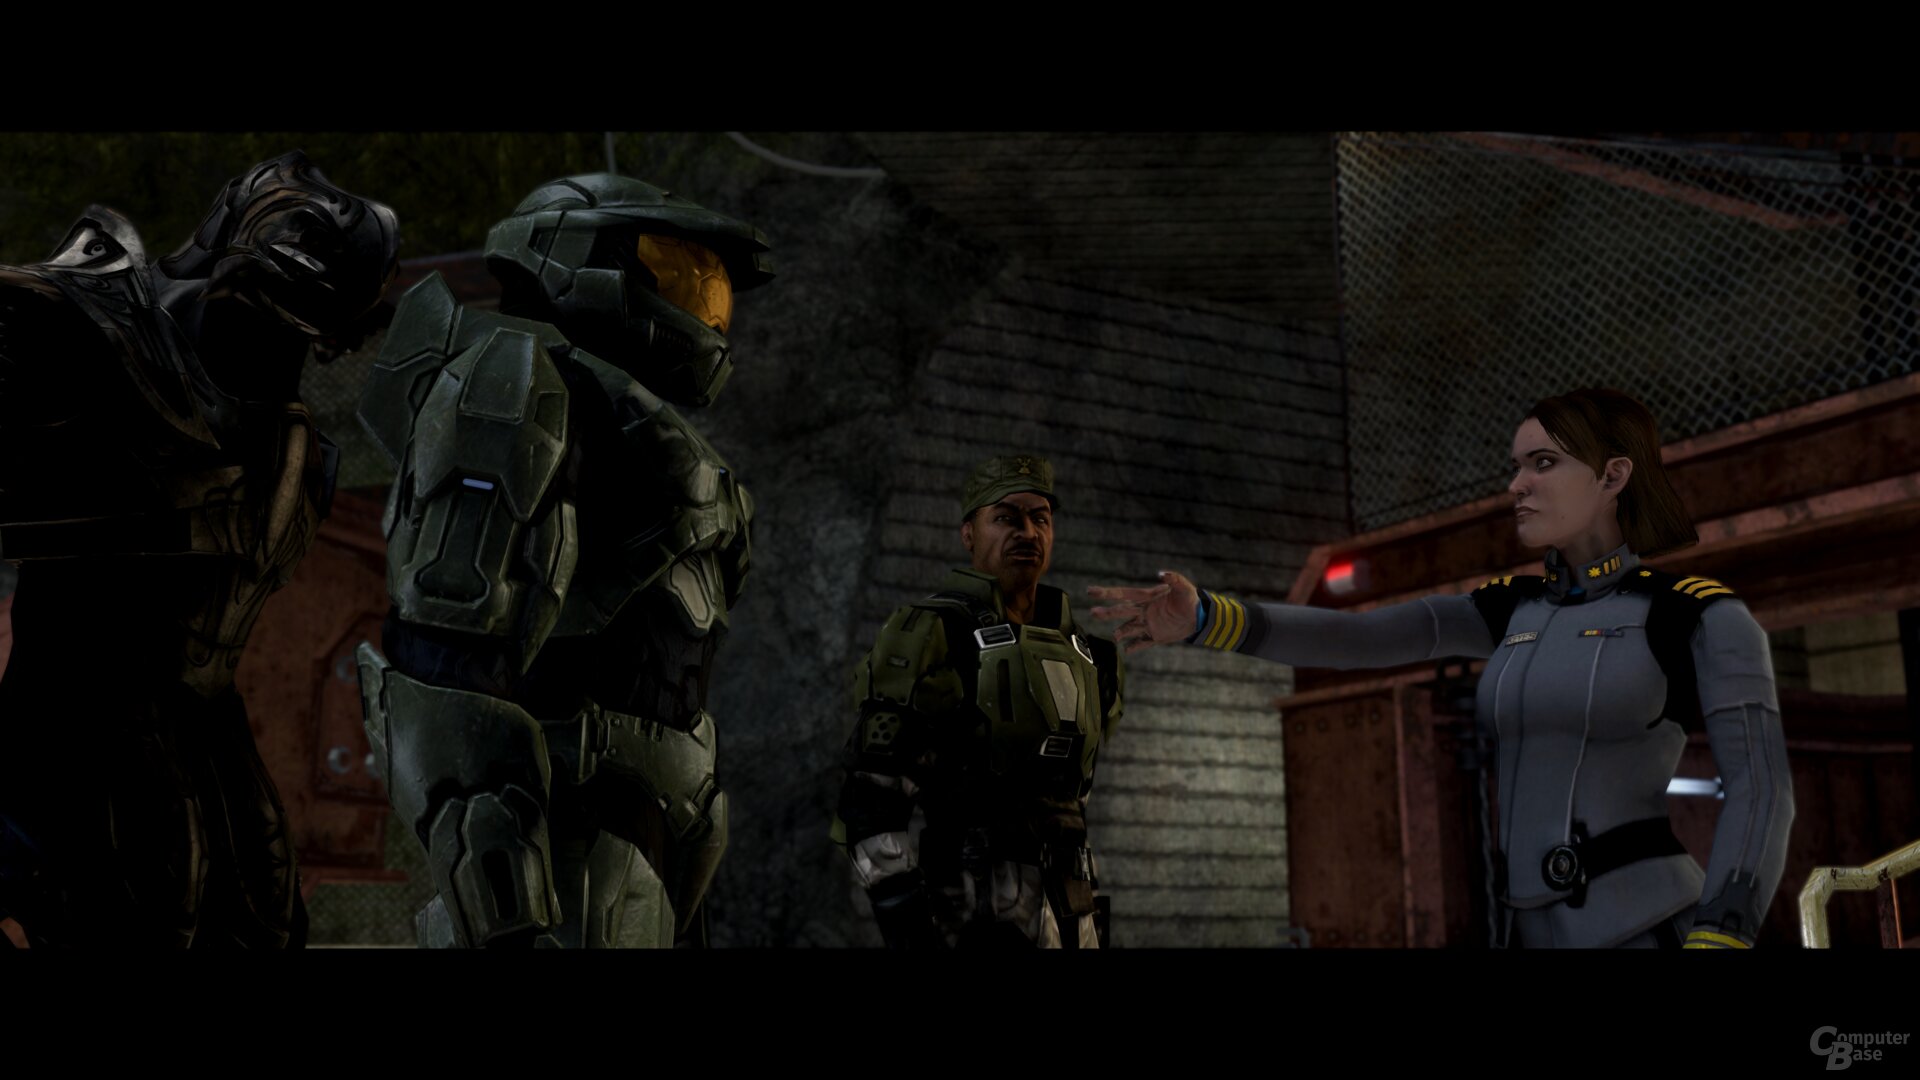 Halo 3: The Master Chief Collection